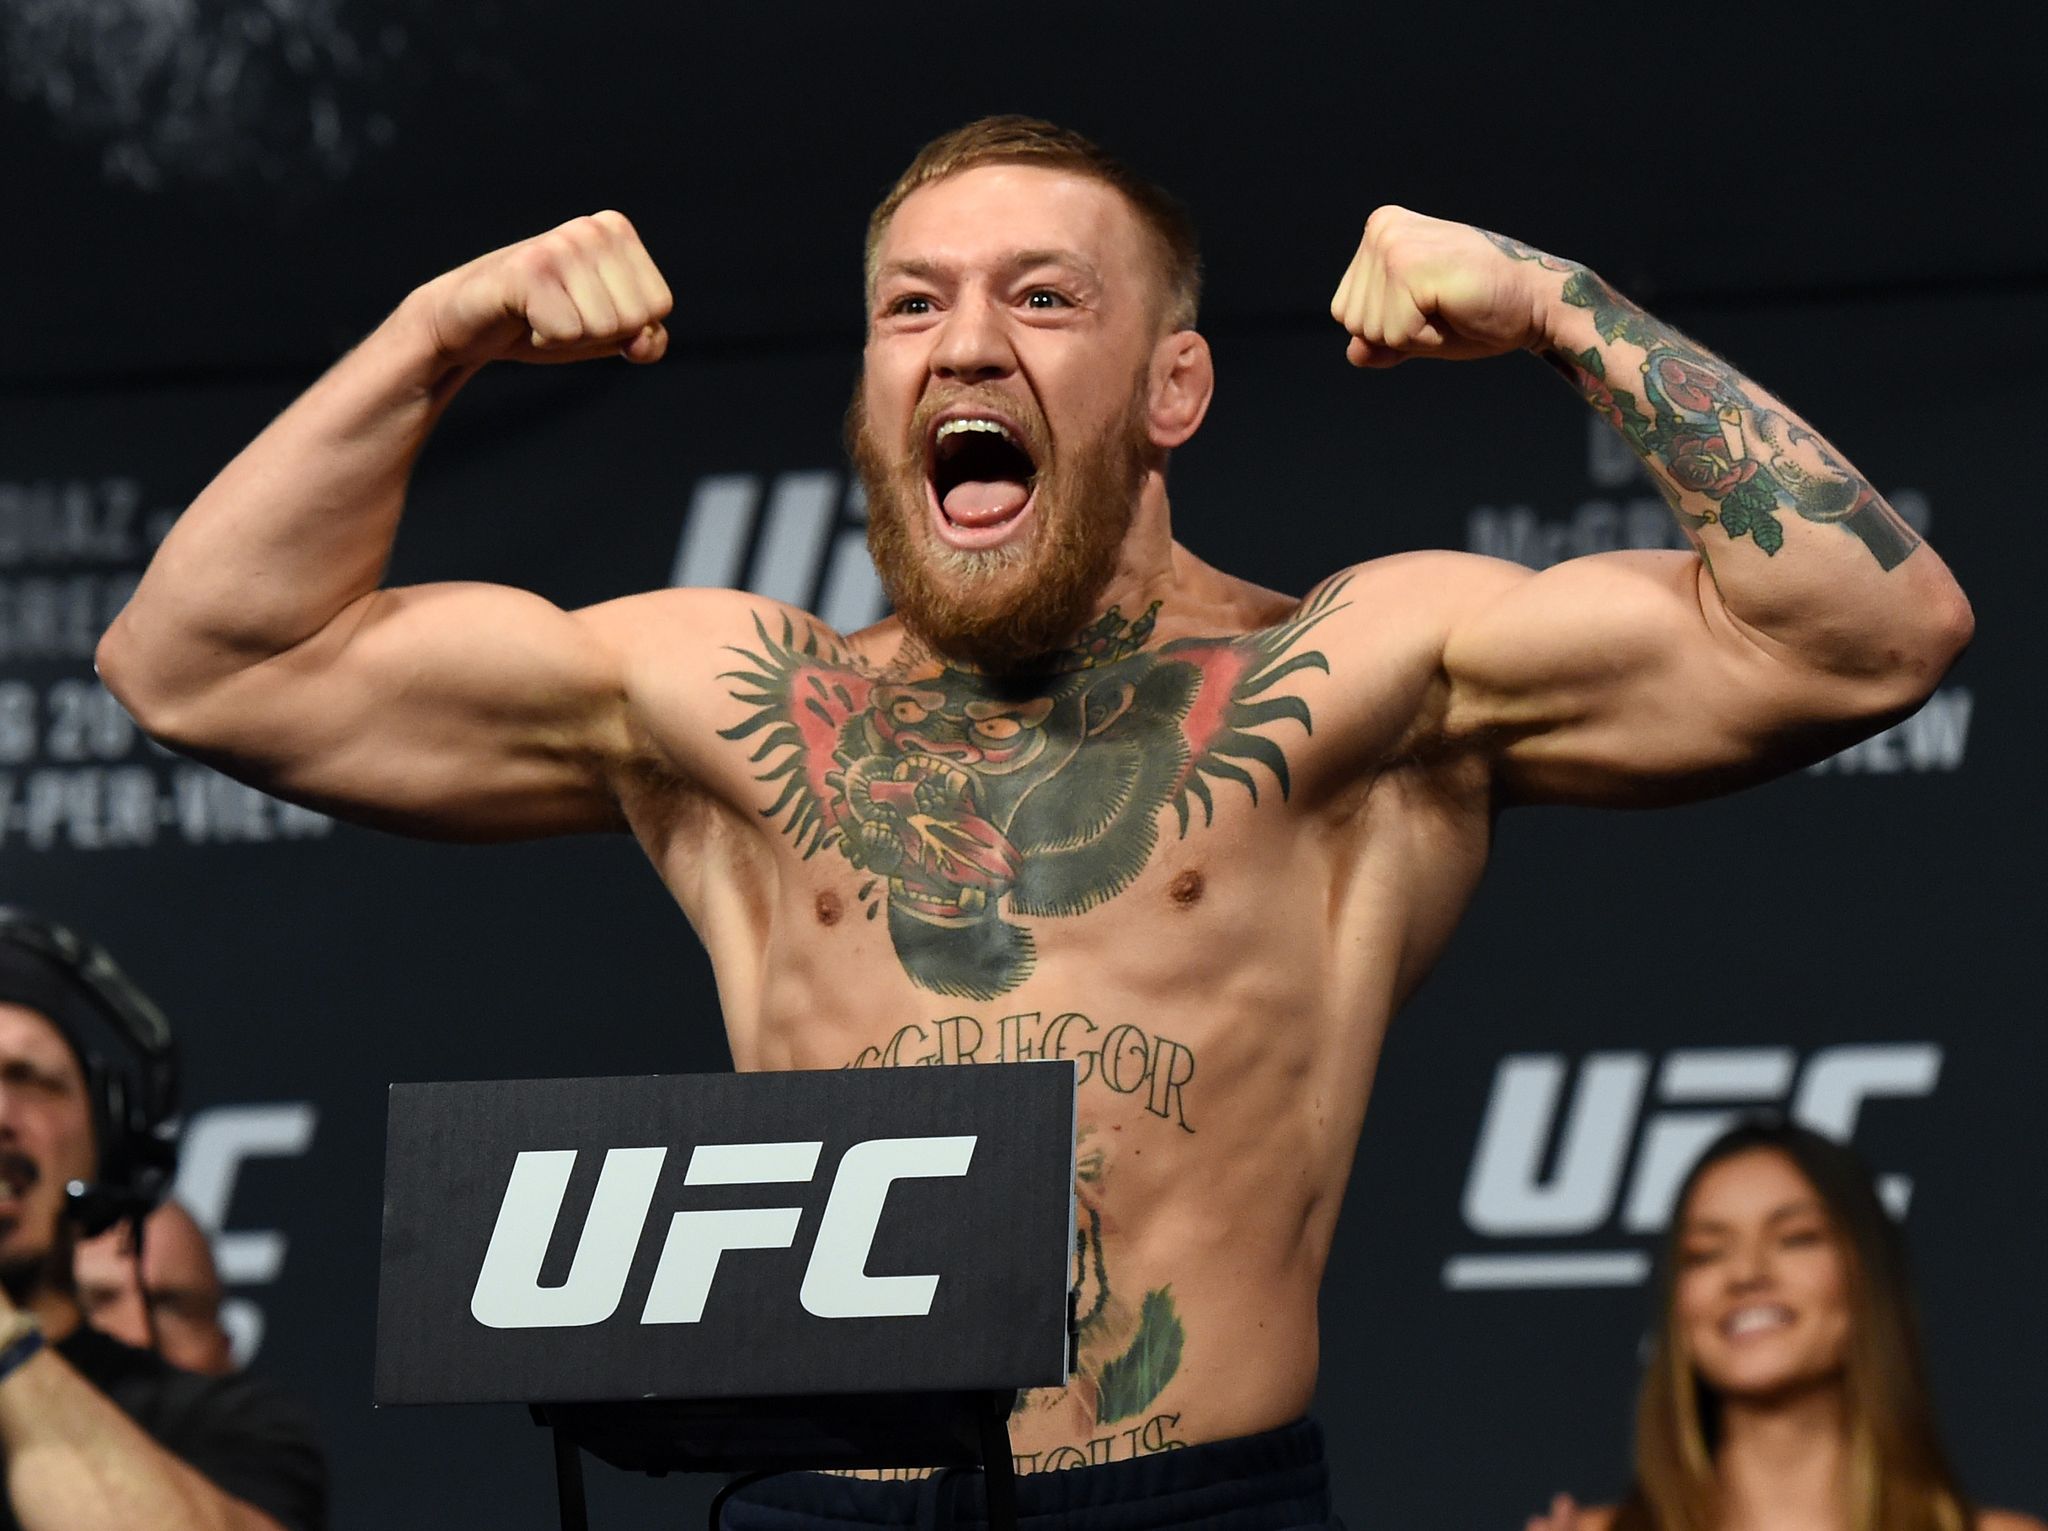 https://hips.hearstapps.com/hmg-prod/images/featherweight-champion-conor-mcgregor-poses-on-the-scale-news-photo-592224614-1553598359.jpg?crop=1xw:1xh;center,top&resize=2048:*